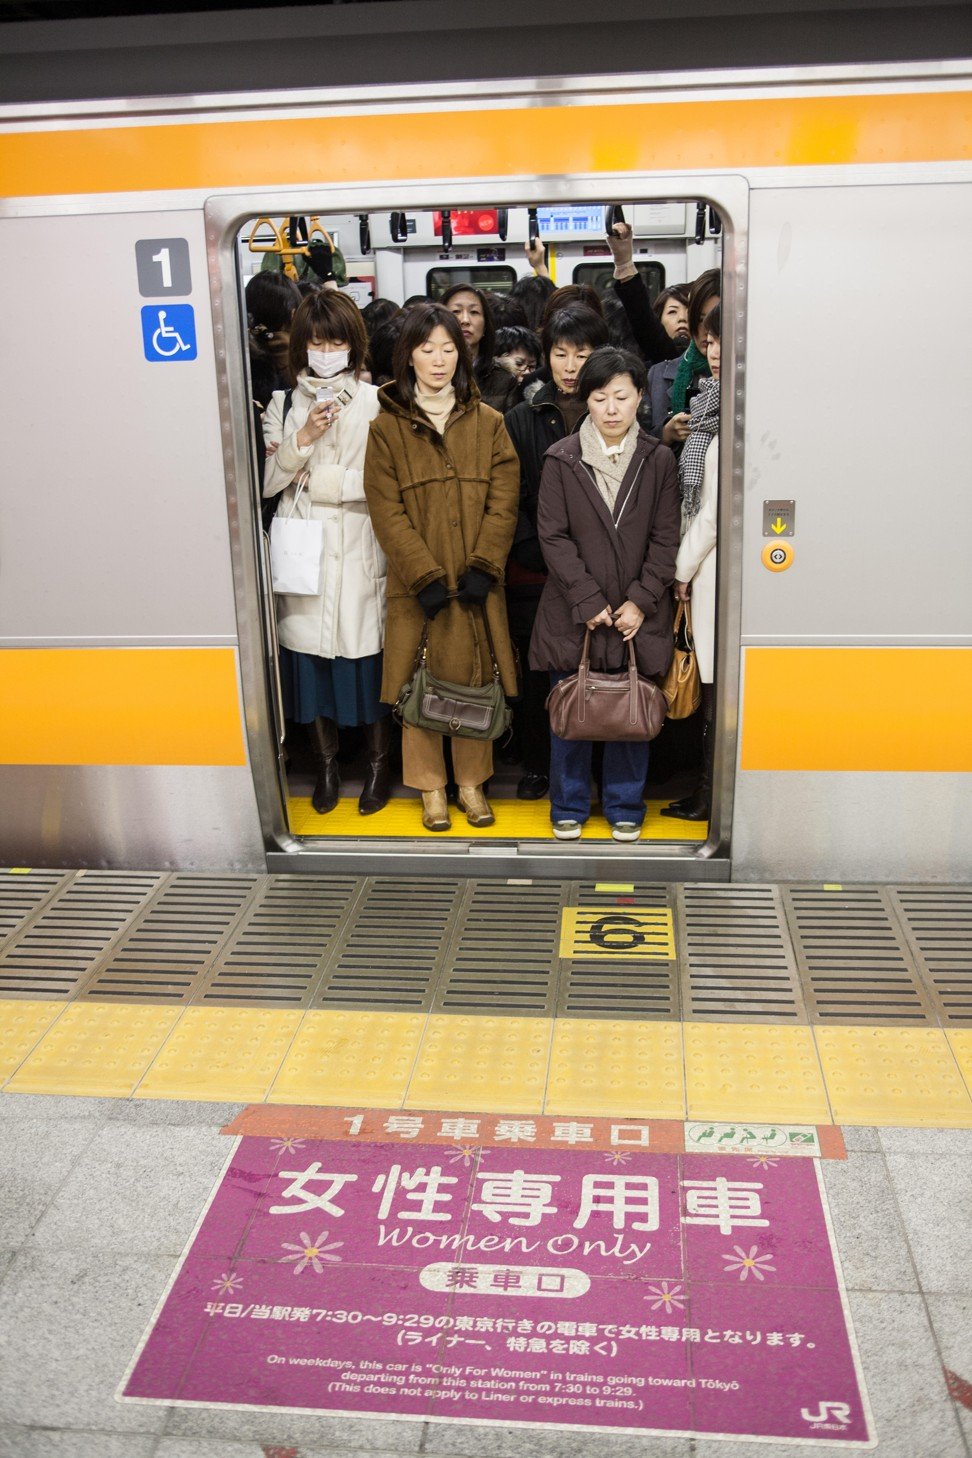 Korean Train Sex - Six ways Japanese women can deter gropers on trains and ...